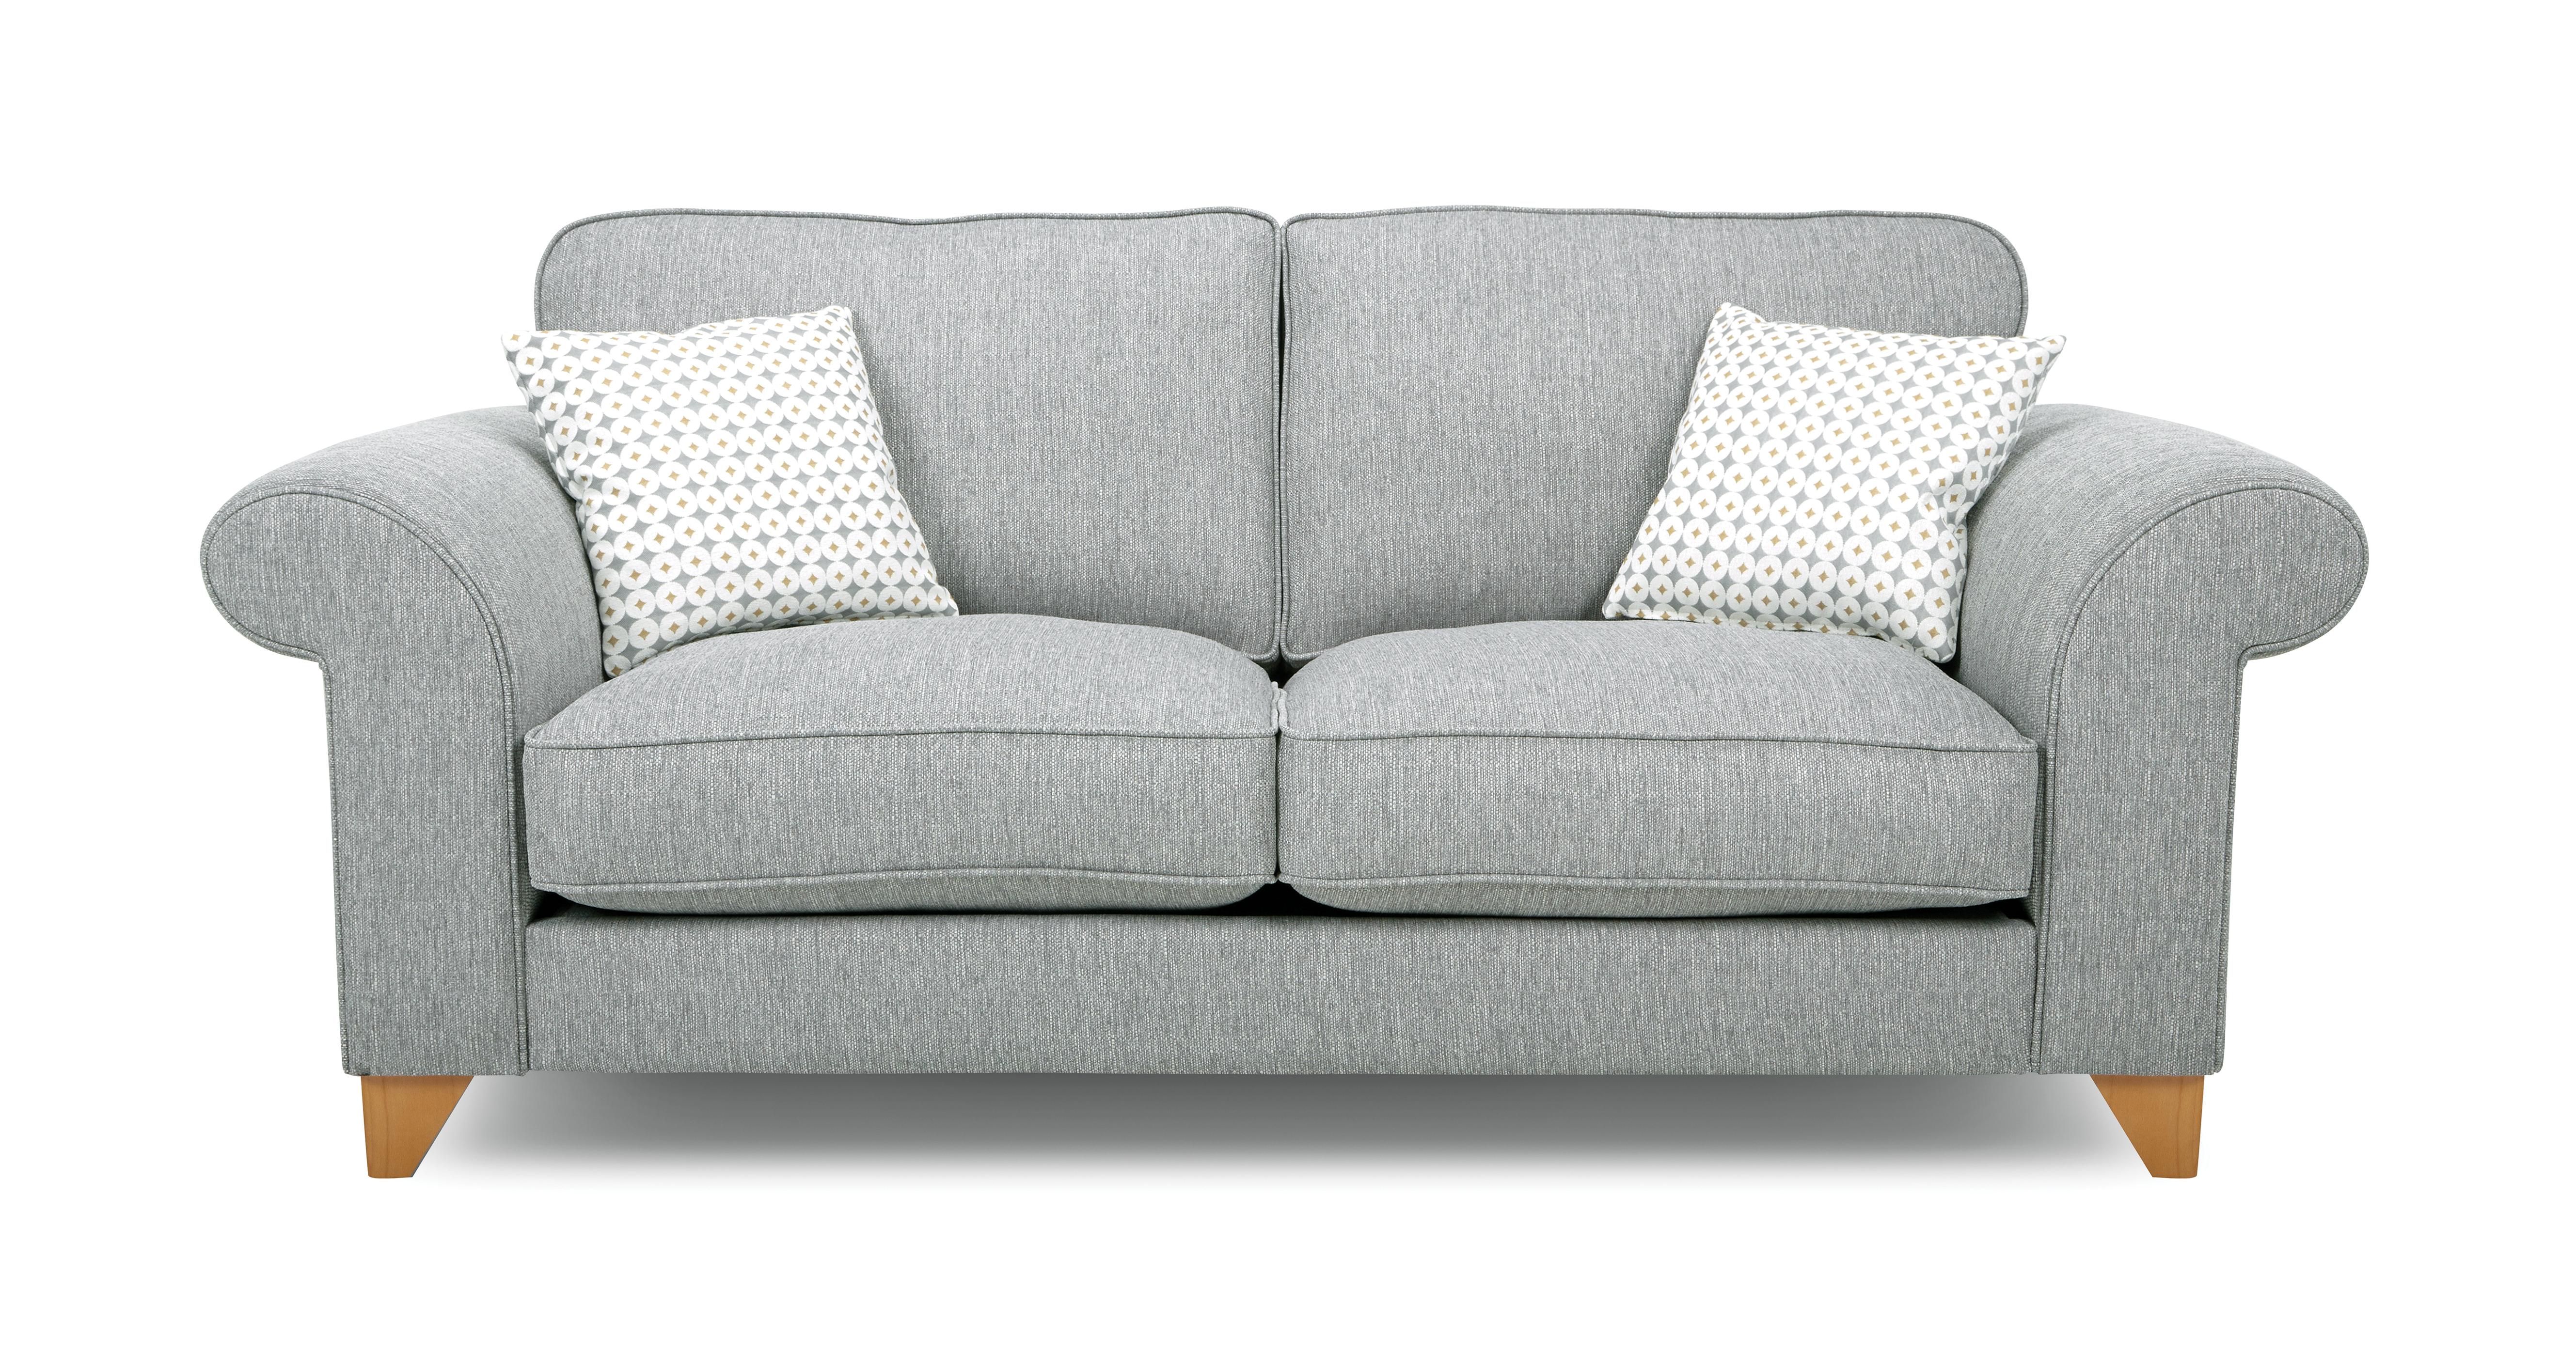 Angelic 2 Seater Sofa Cotswold Plain | DFS